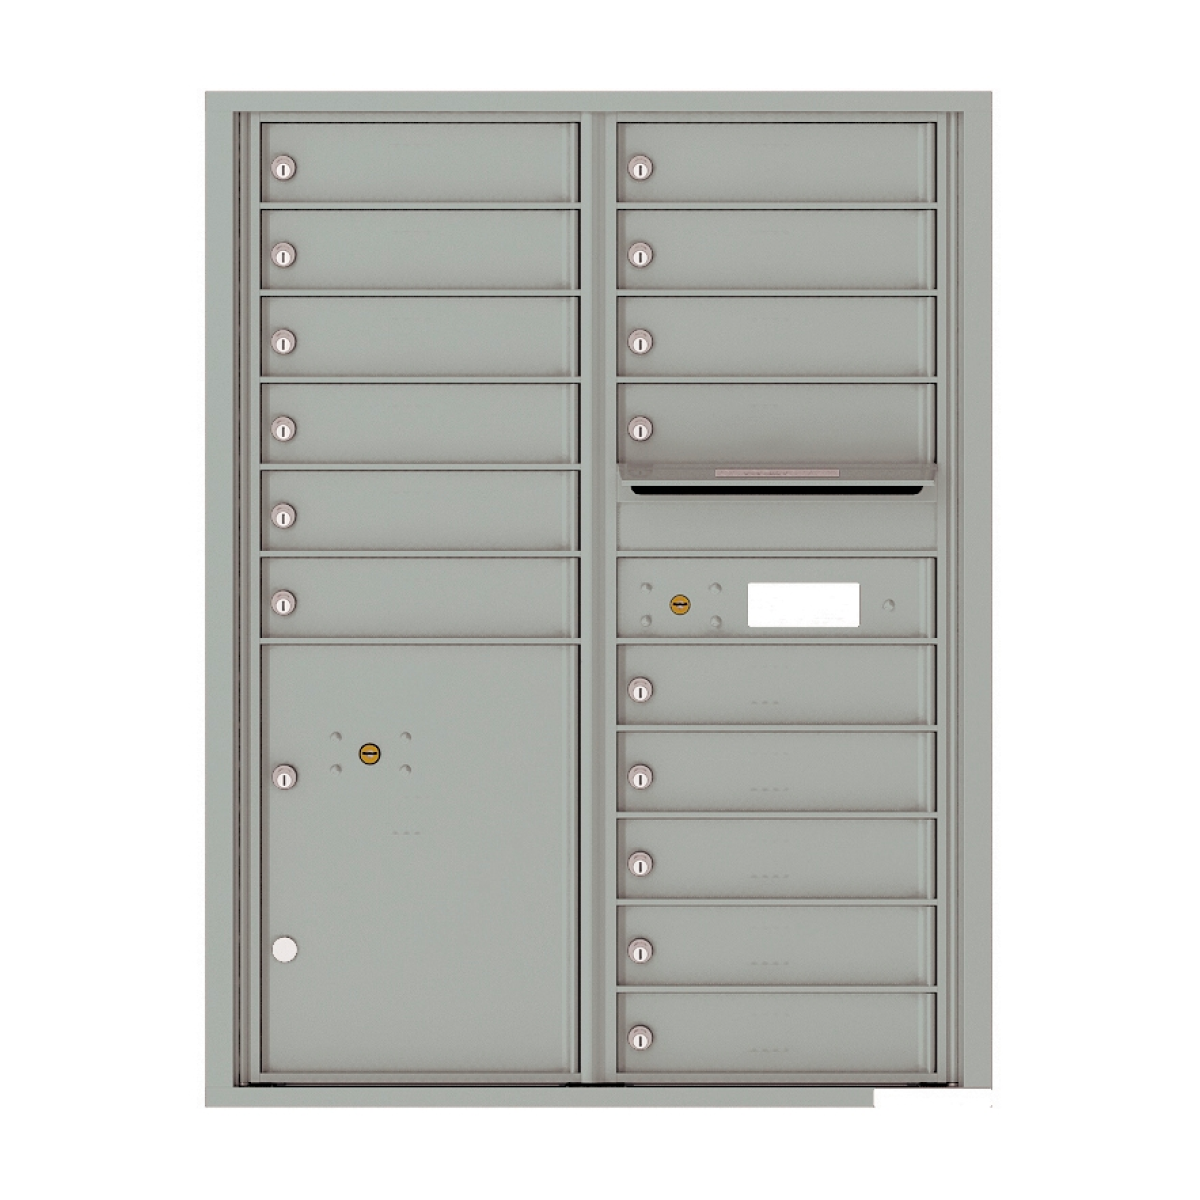 Surface Mount 4C Horizontal Mailbox – 15 Doors 2 Parcel Lockers – Front Loading – 4C13D-15-4CSM13D – USPS Approved Product Image